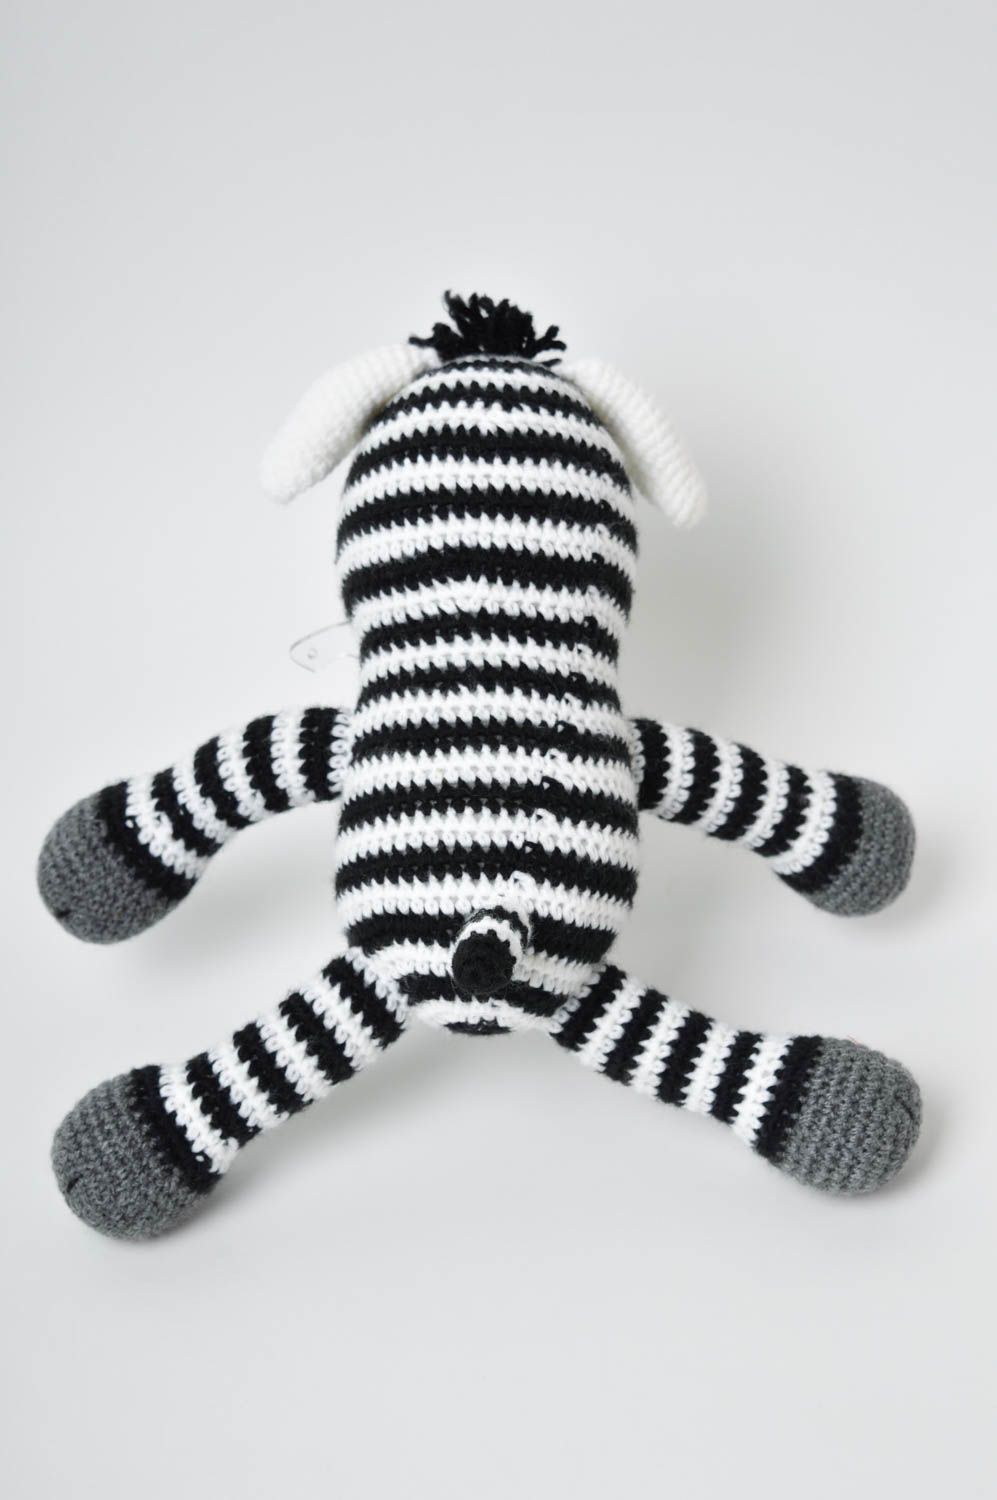 Handmade toy small zebra soft toy decorative crocheted toy striped crocheted toy photo 4